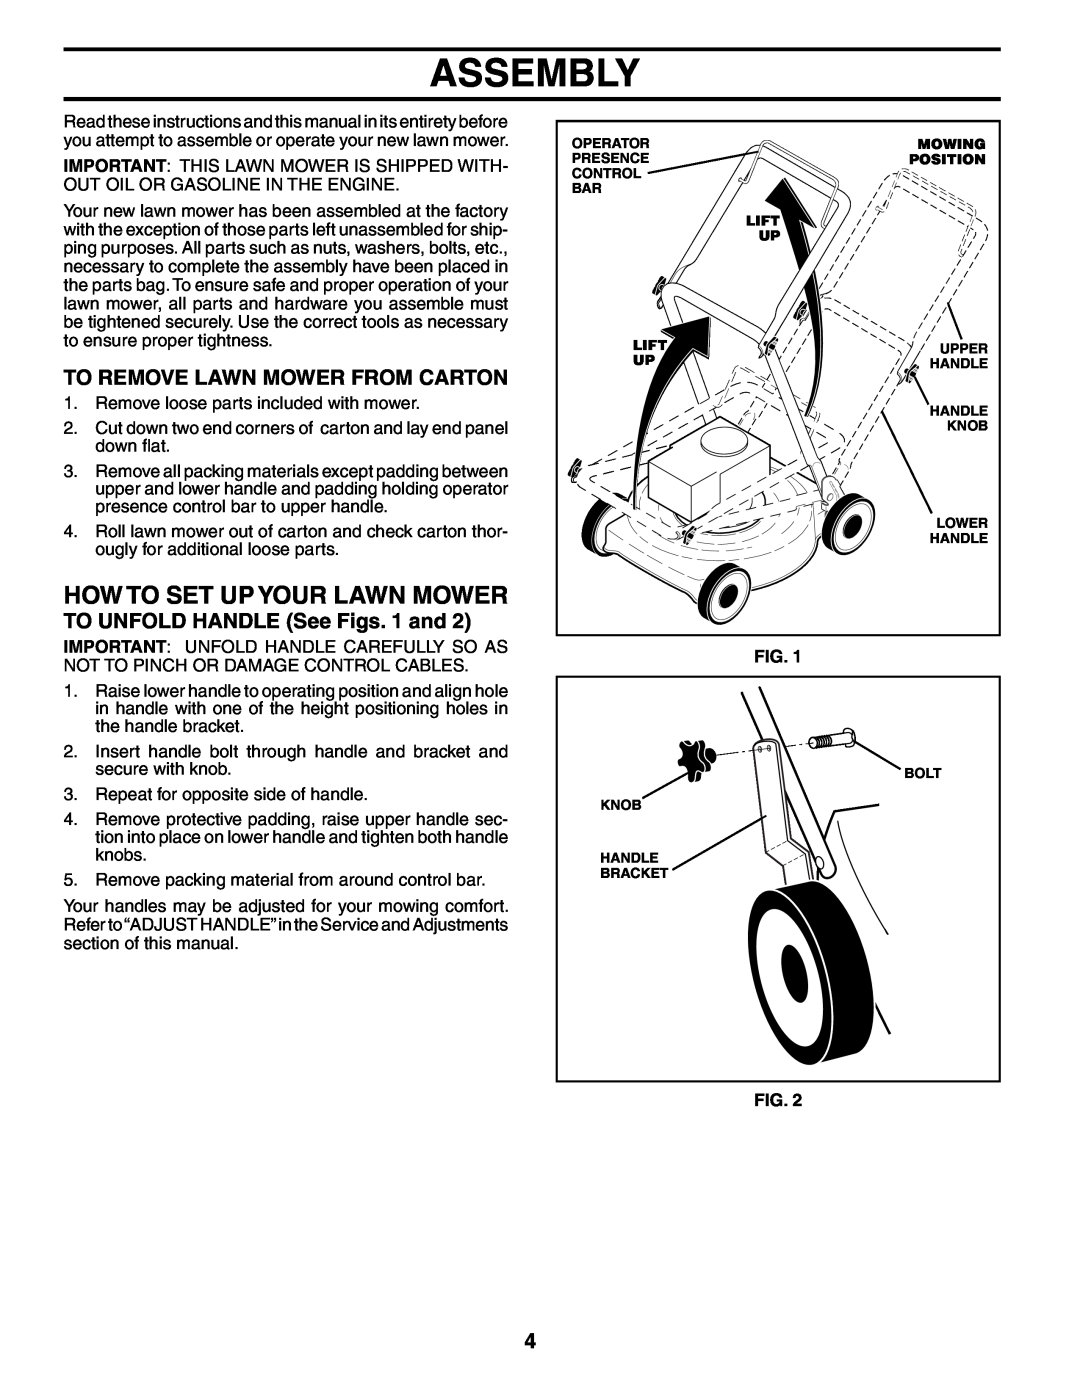 Husqvarna 917.37594 owner manual Assembly, How To Set Up Your Lawn Mower, To Remove Lawn Mower From Carton 